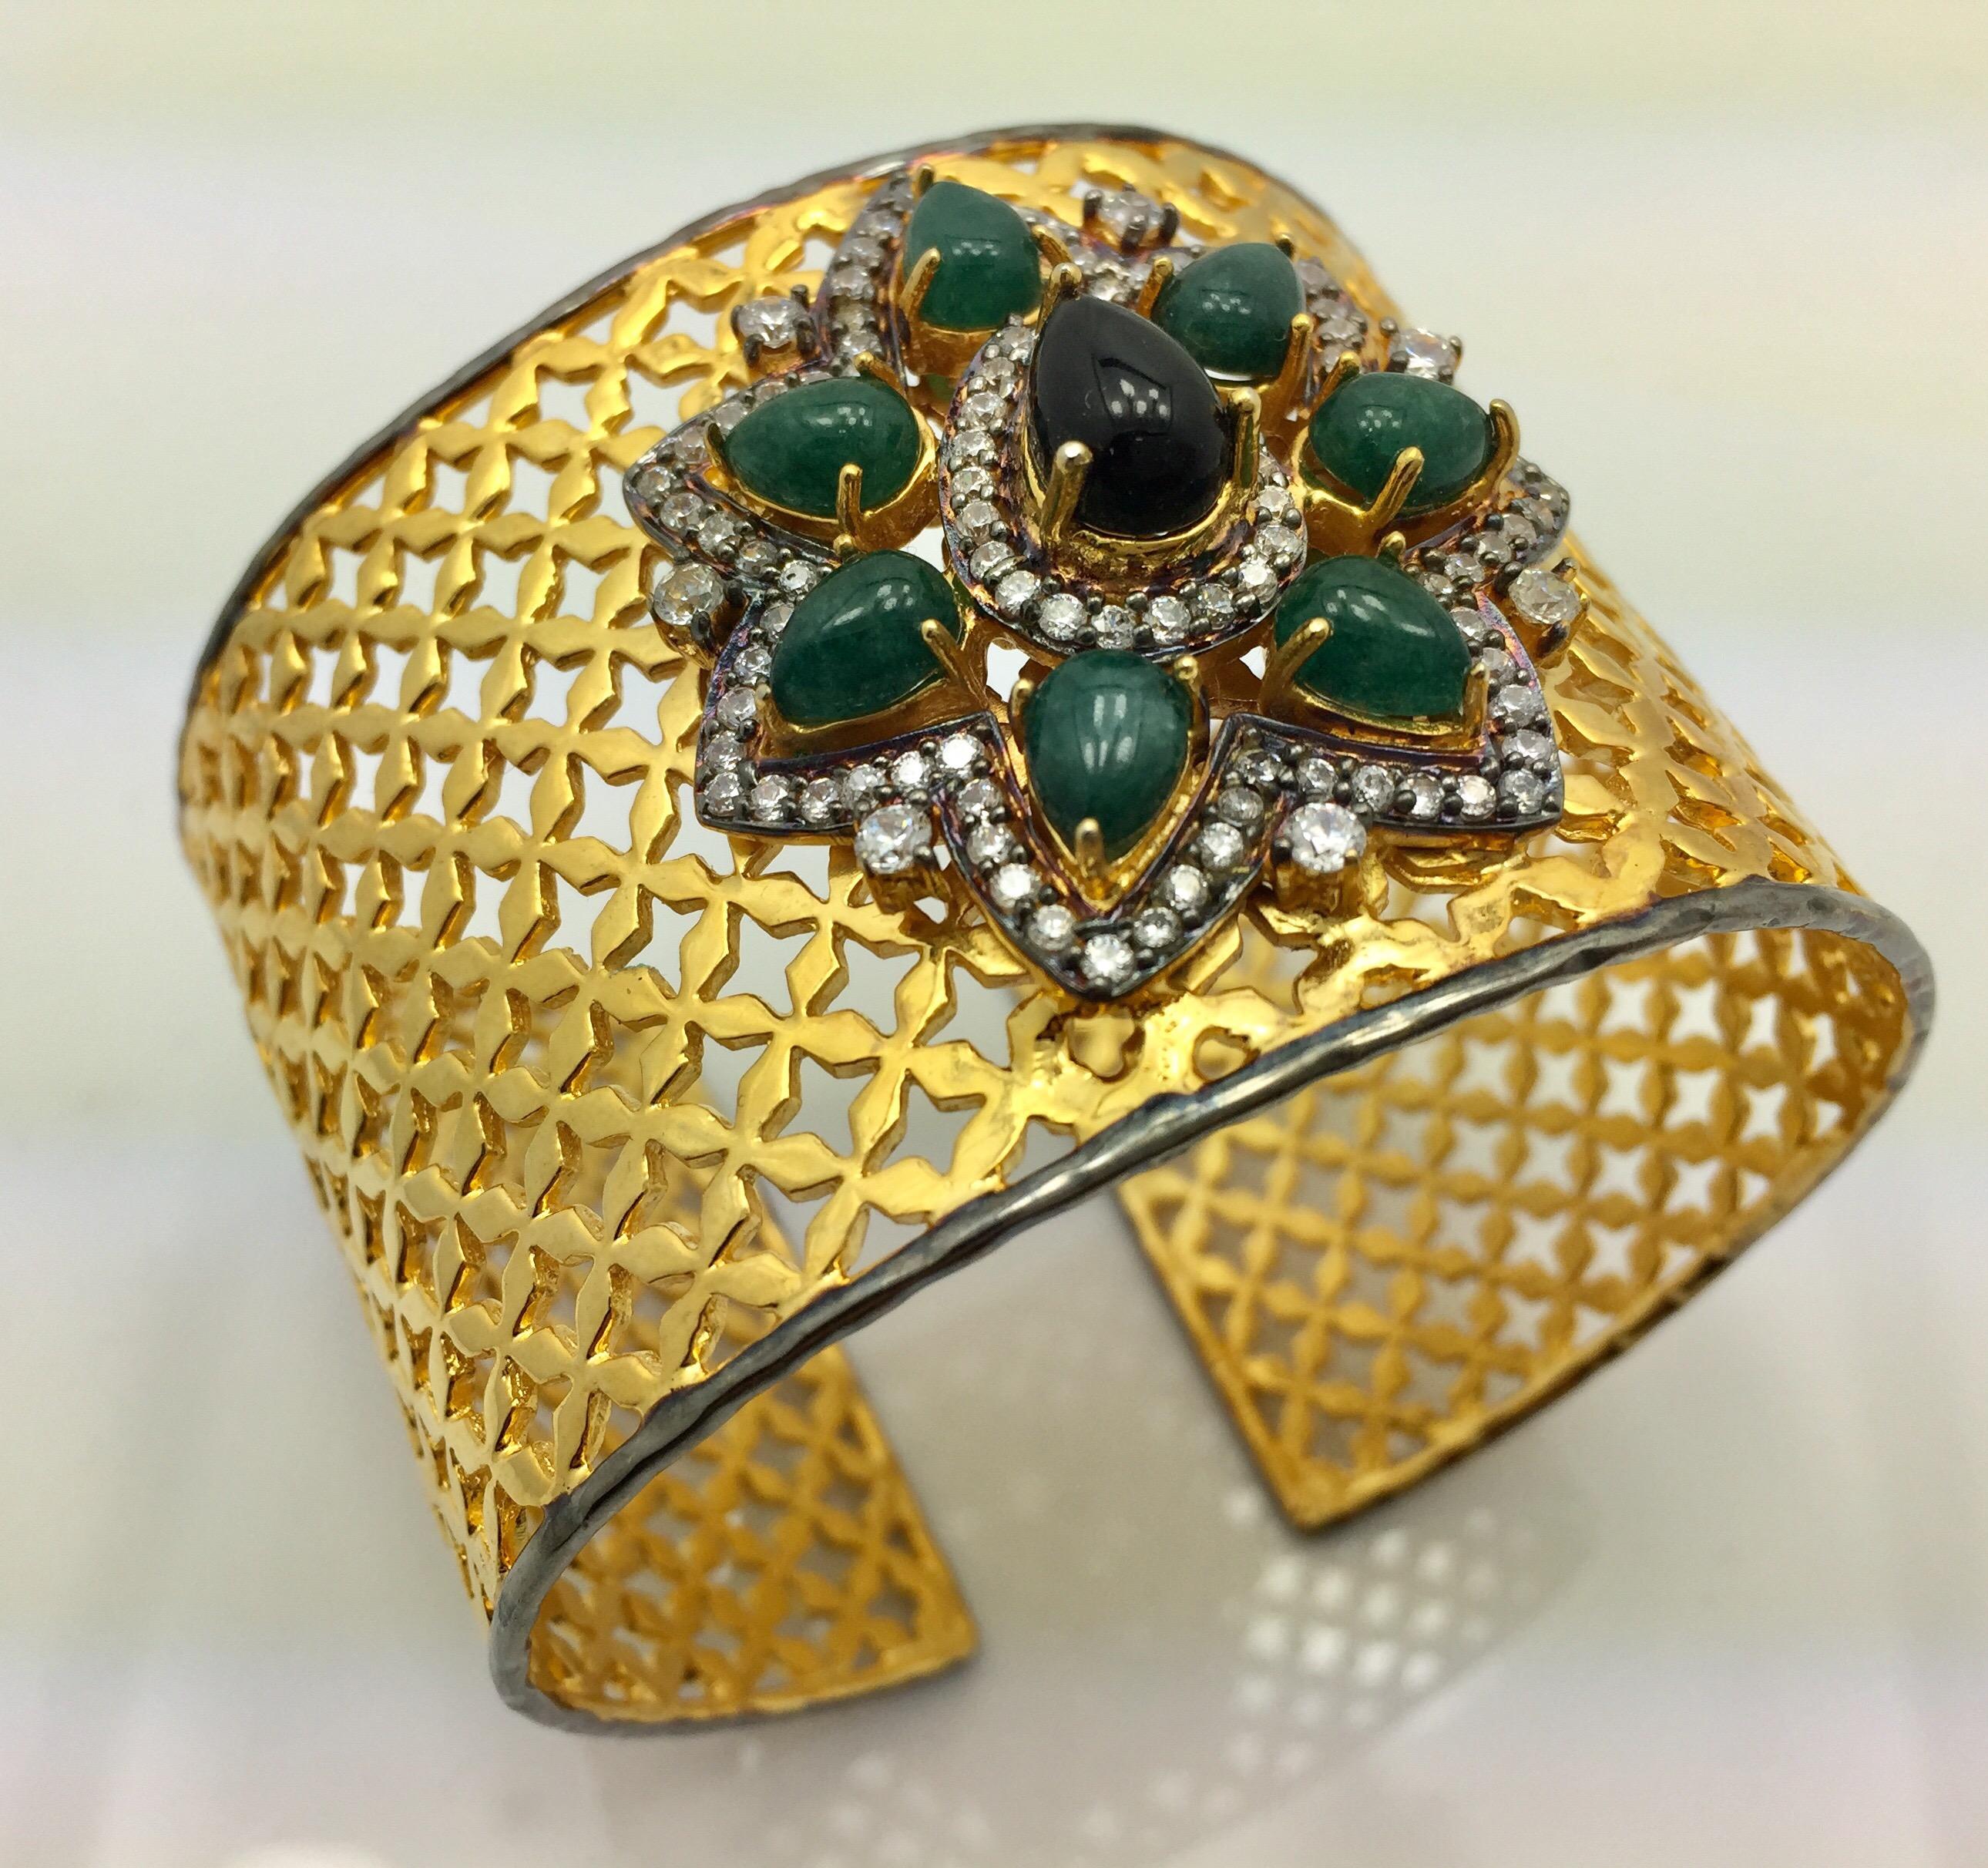 A stunning lattice cuff inspired by the beautiful Taj Mahal is embellished with green faux quartz and black onyx.  The intricate detail in handmade cuff is further enhanced with cubic zircon. Cuff is adjustable. 

FOLLOW  MEGHNA JEWELS storefront to